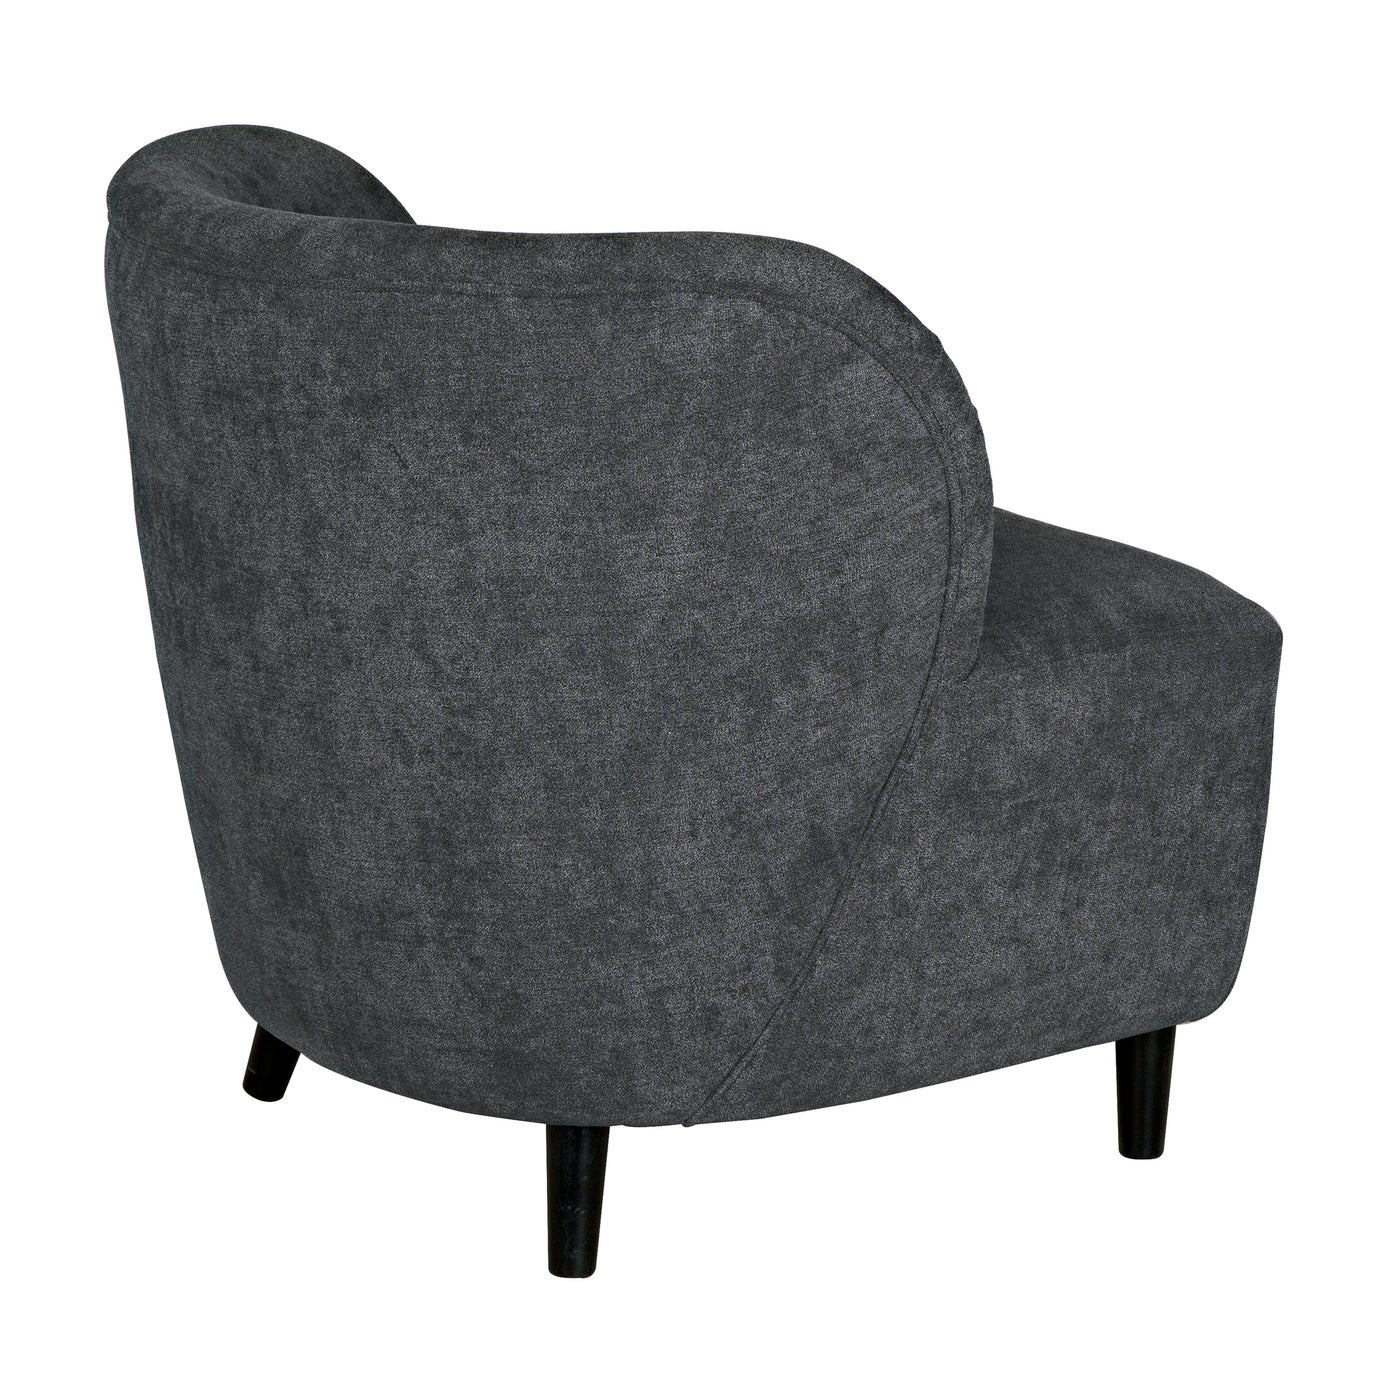 Laffont Chair with Grey Fabric-Noir Furniture-Blue Hand Home